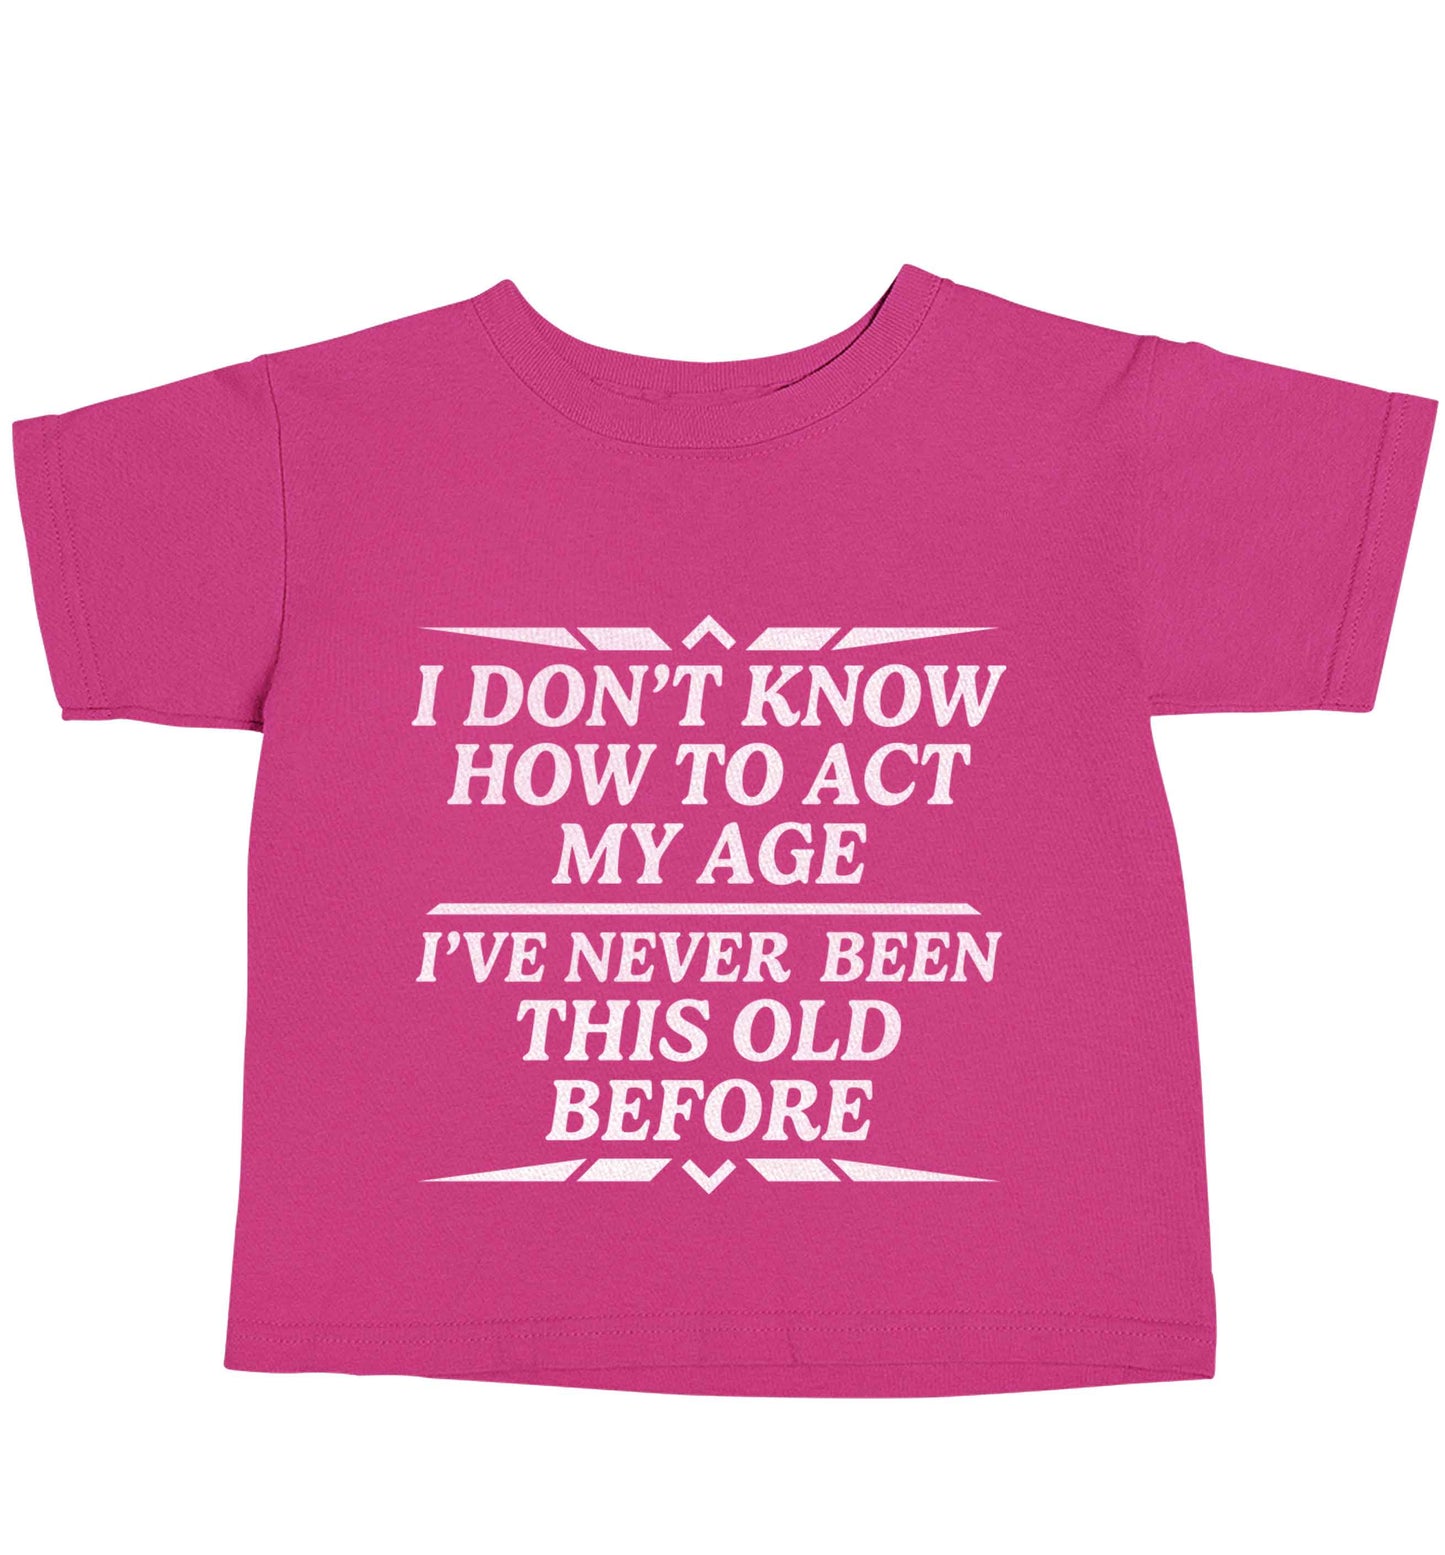 I don't know how to act my age I've never been this old before pink baby toddler Tshirt 2 Years